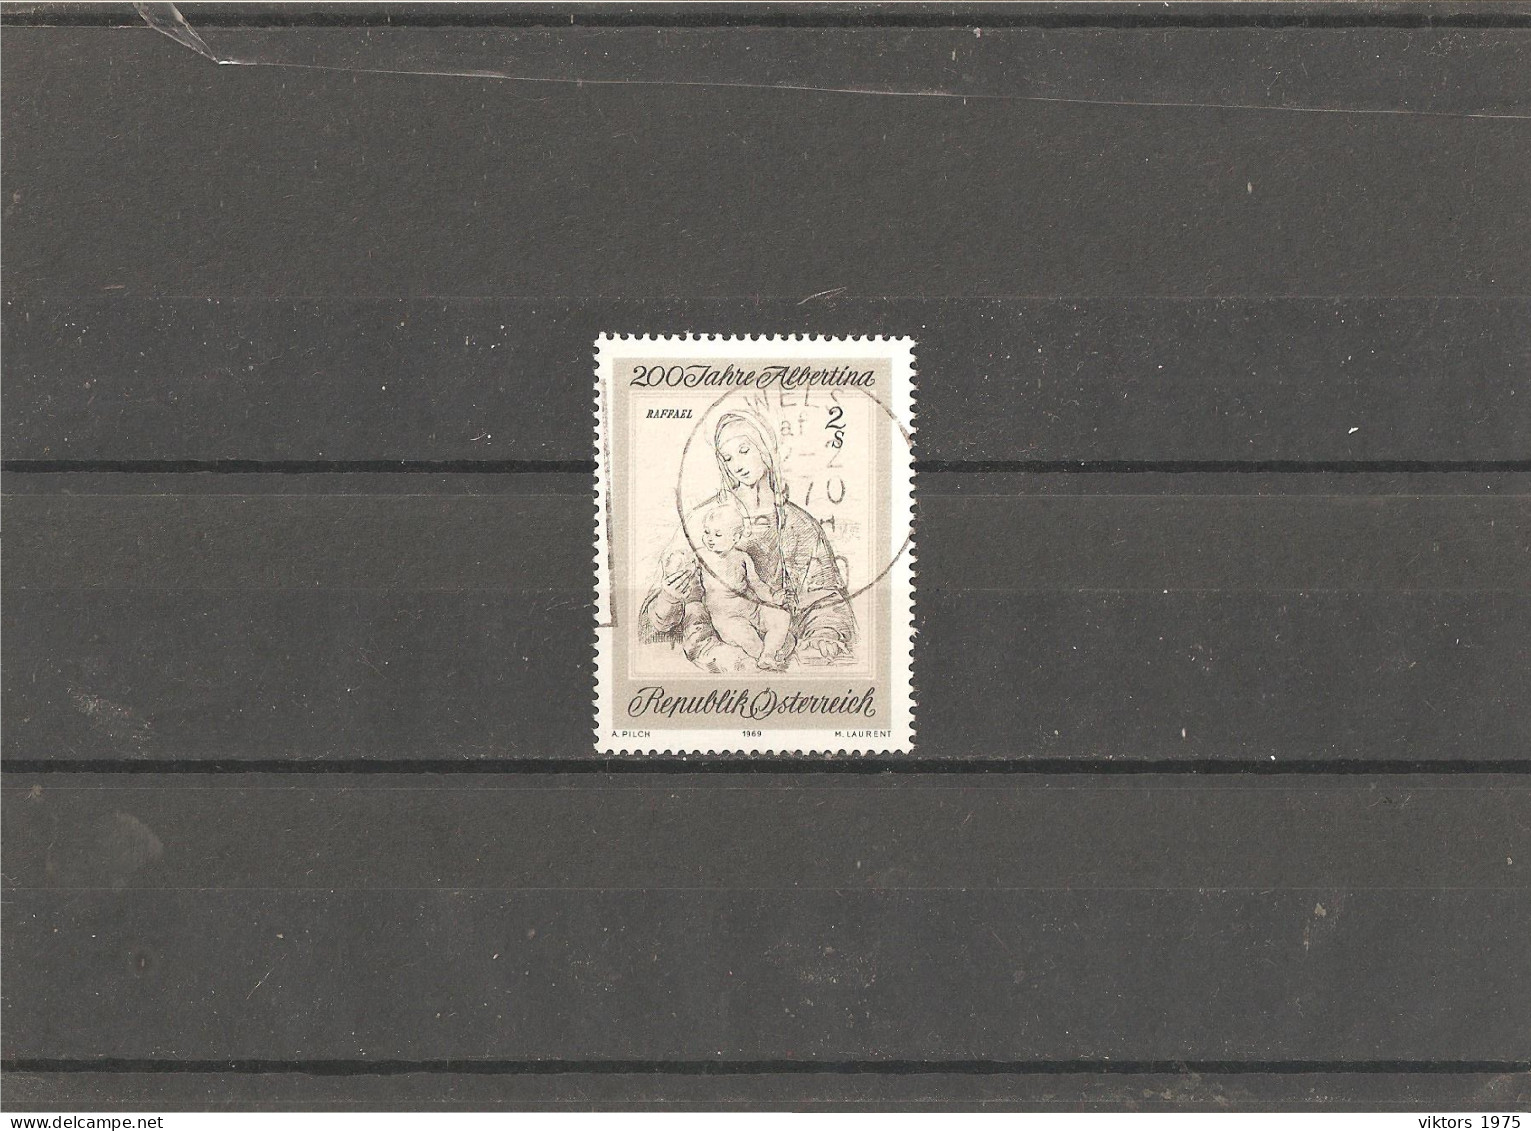 Used Stamp Nr.1309 In MICHEL Catalog - Used Stamps